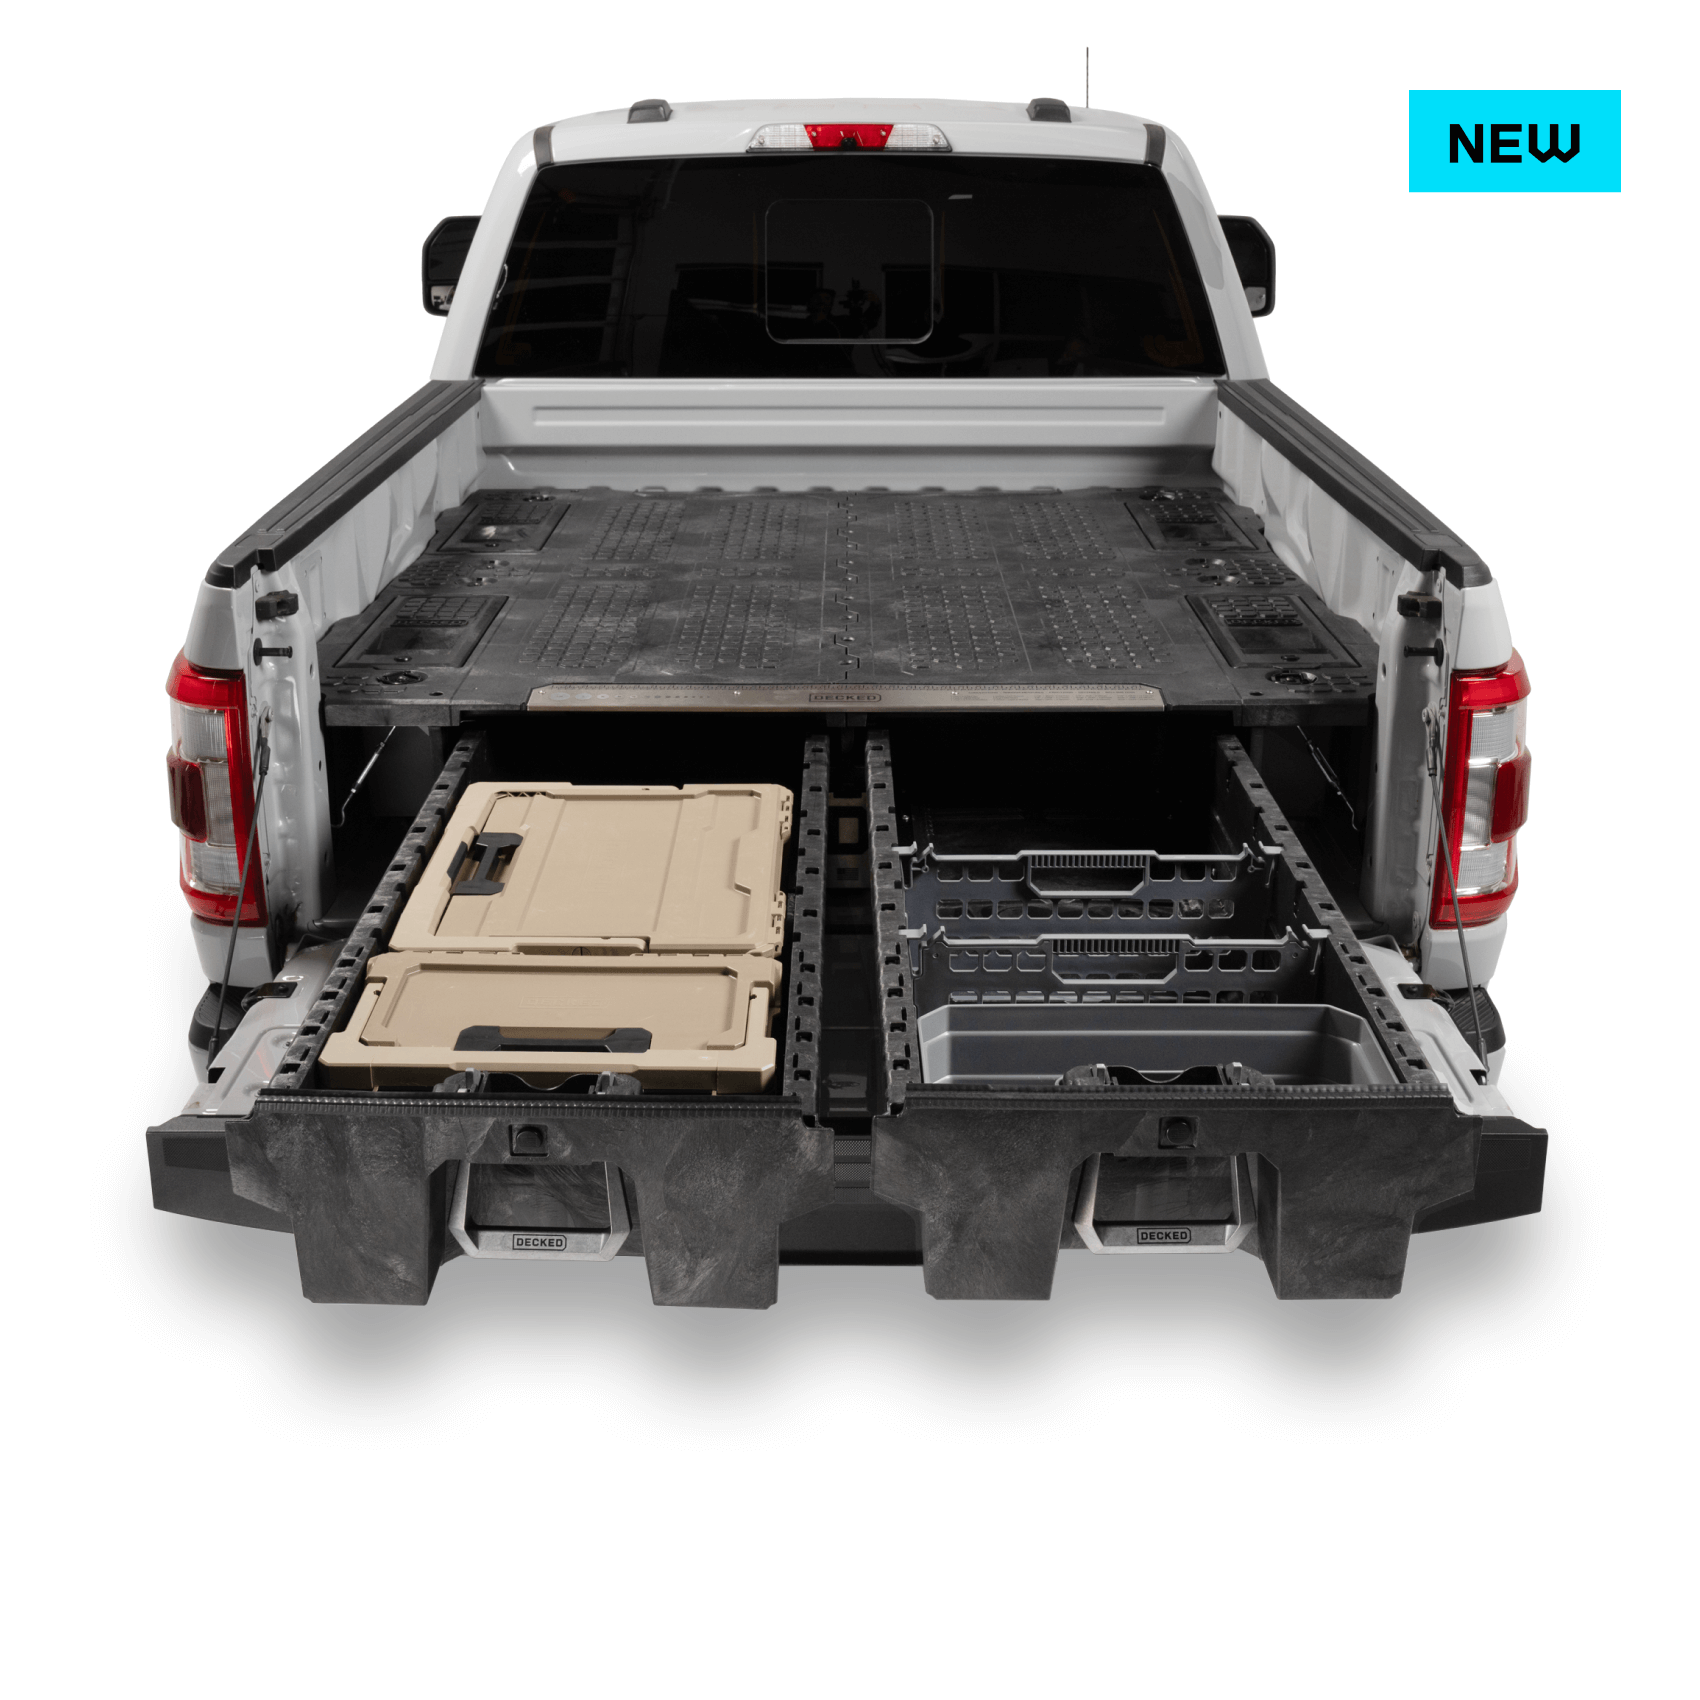 Studio image of a truck with a drawer system